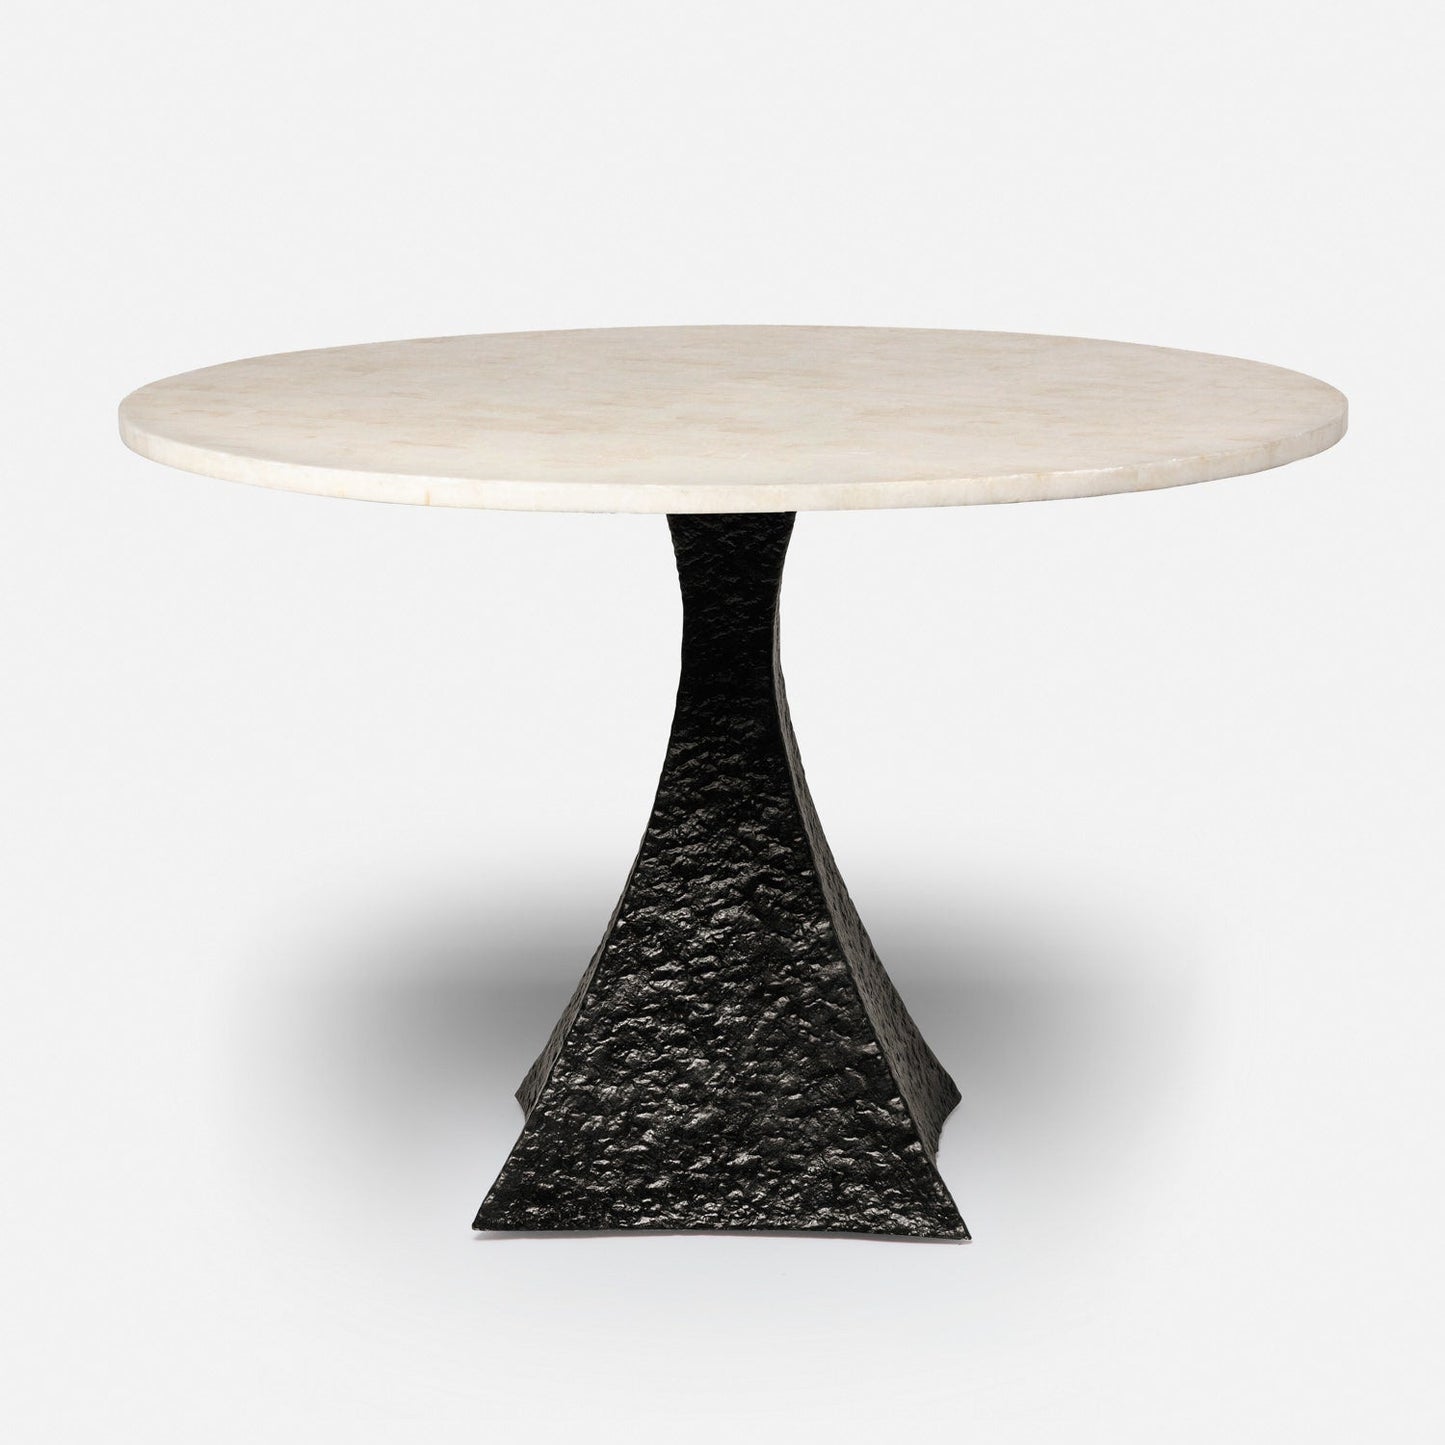 Made Goods Noor 54" x 30" Bumpy Black Iron Dinning Table With Round Ice Crystal Stone Table Top